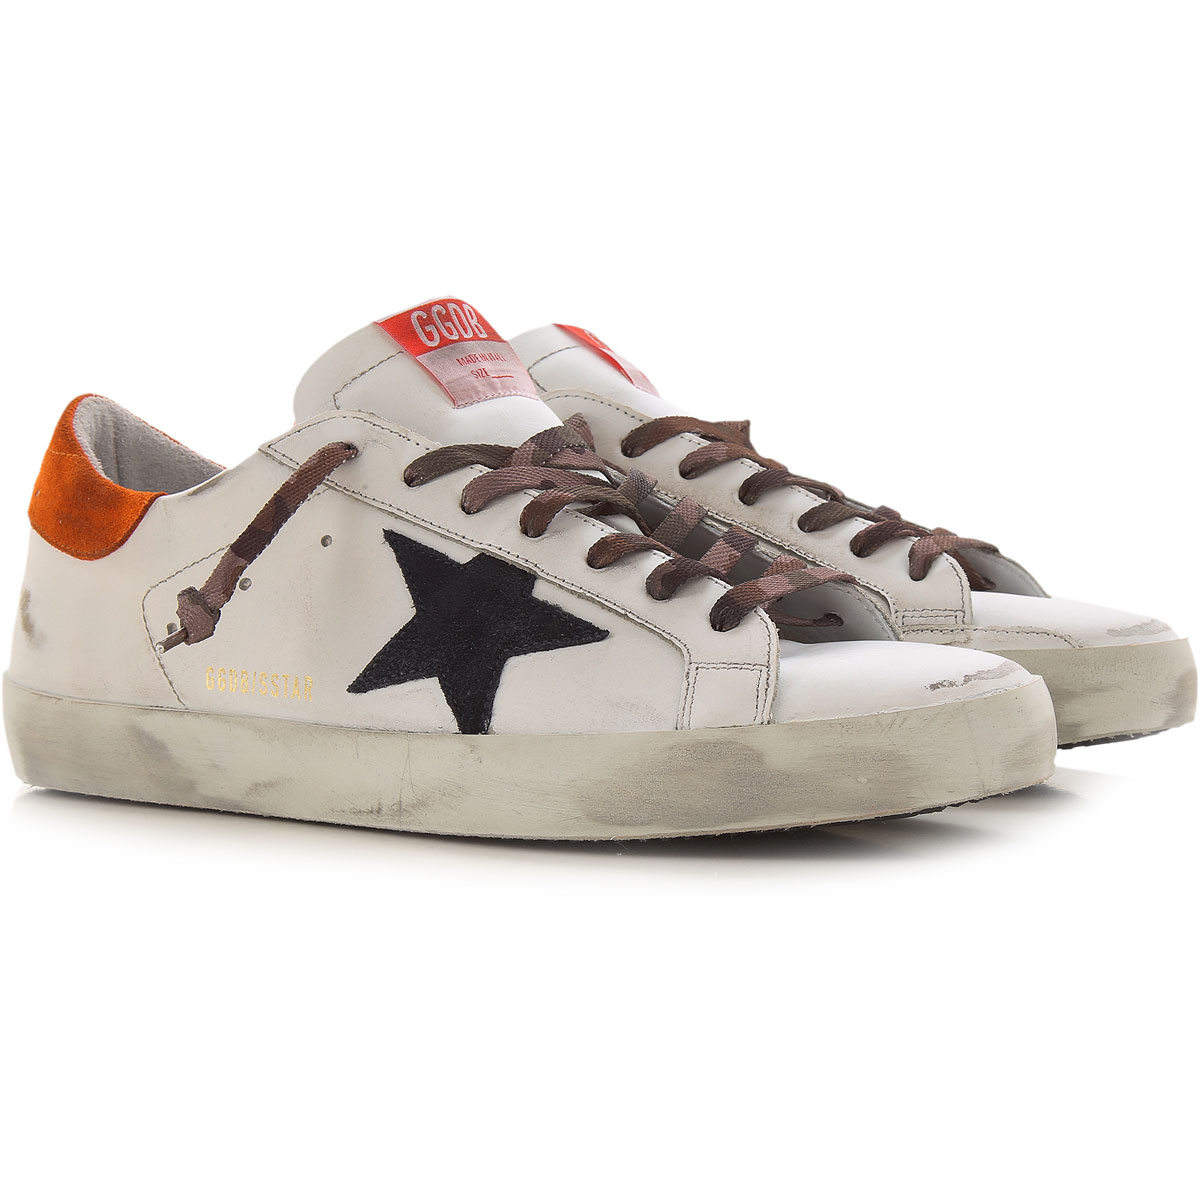 Mens Shoes Golden Goose, Style code gmf00101f00061680505